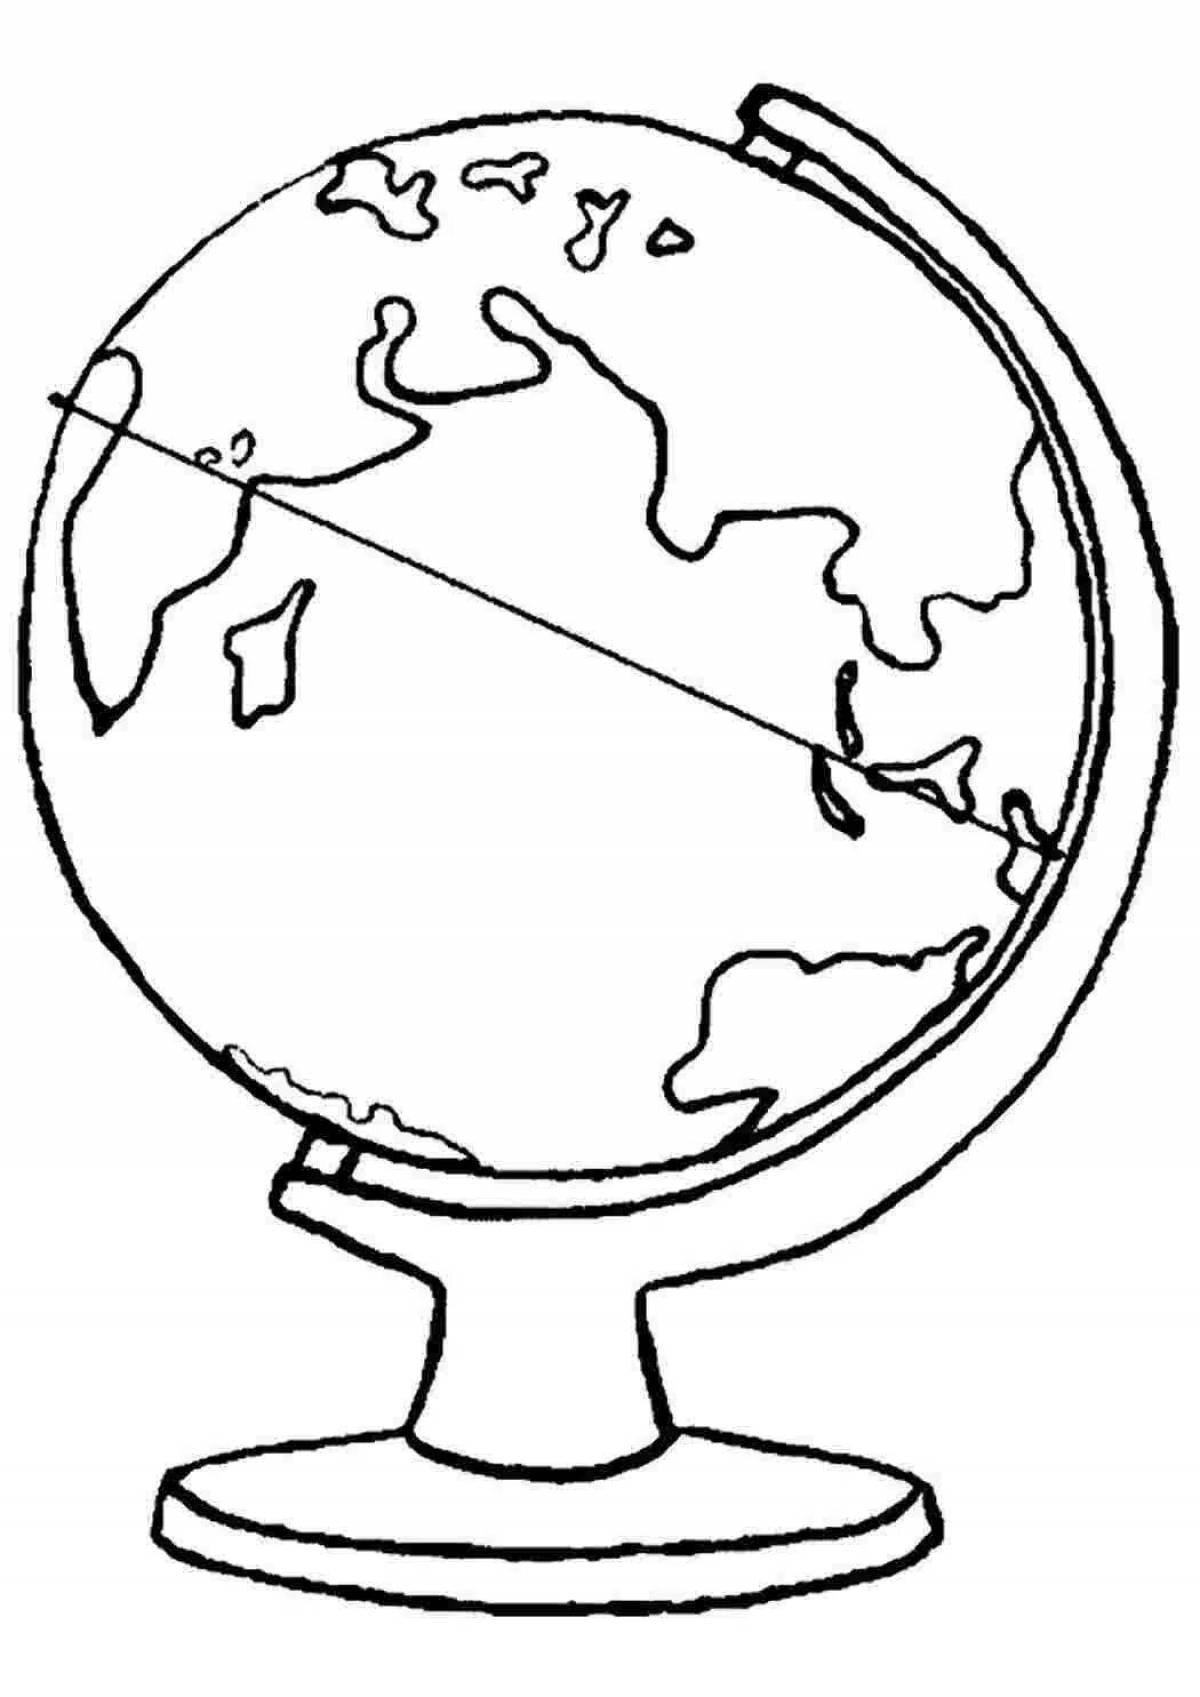 Coloring page graceful equator